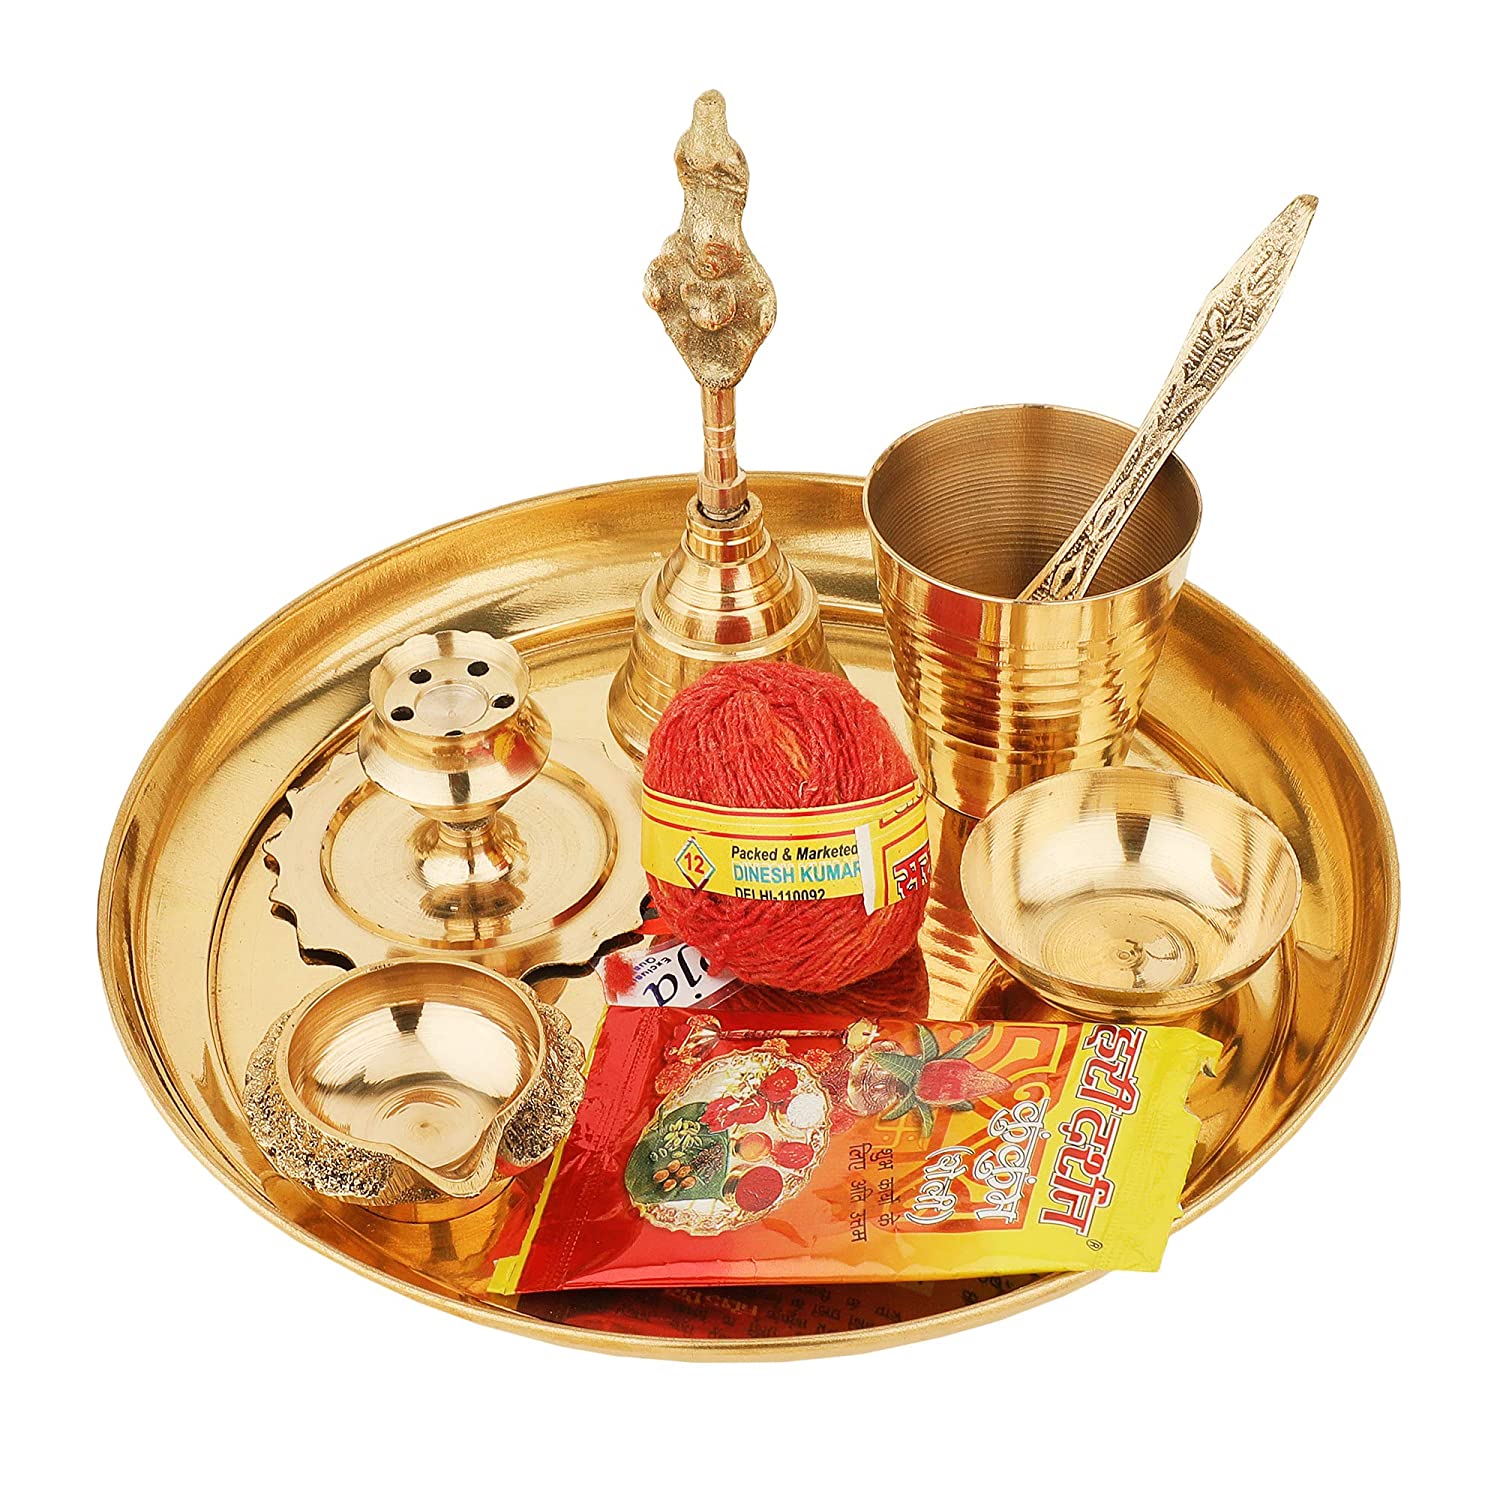 Amazon Navratri Sale: Buy all the worship items from Amazon on Navratri and that too with bumper discounts